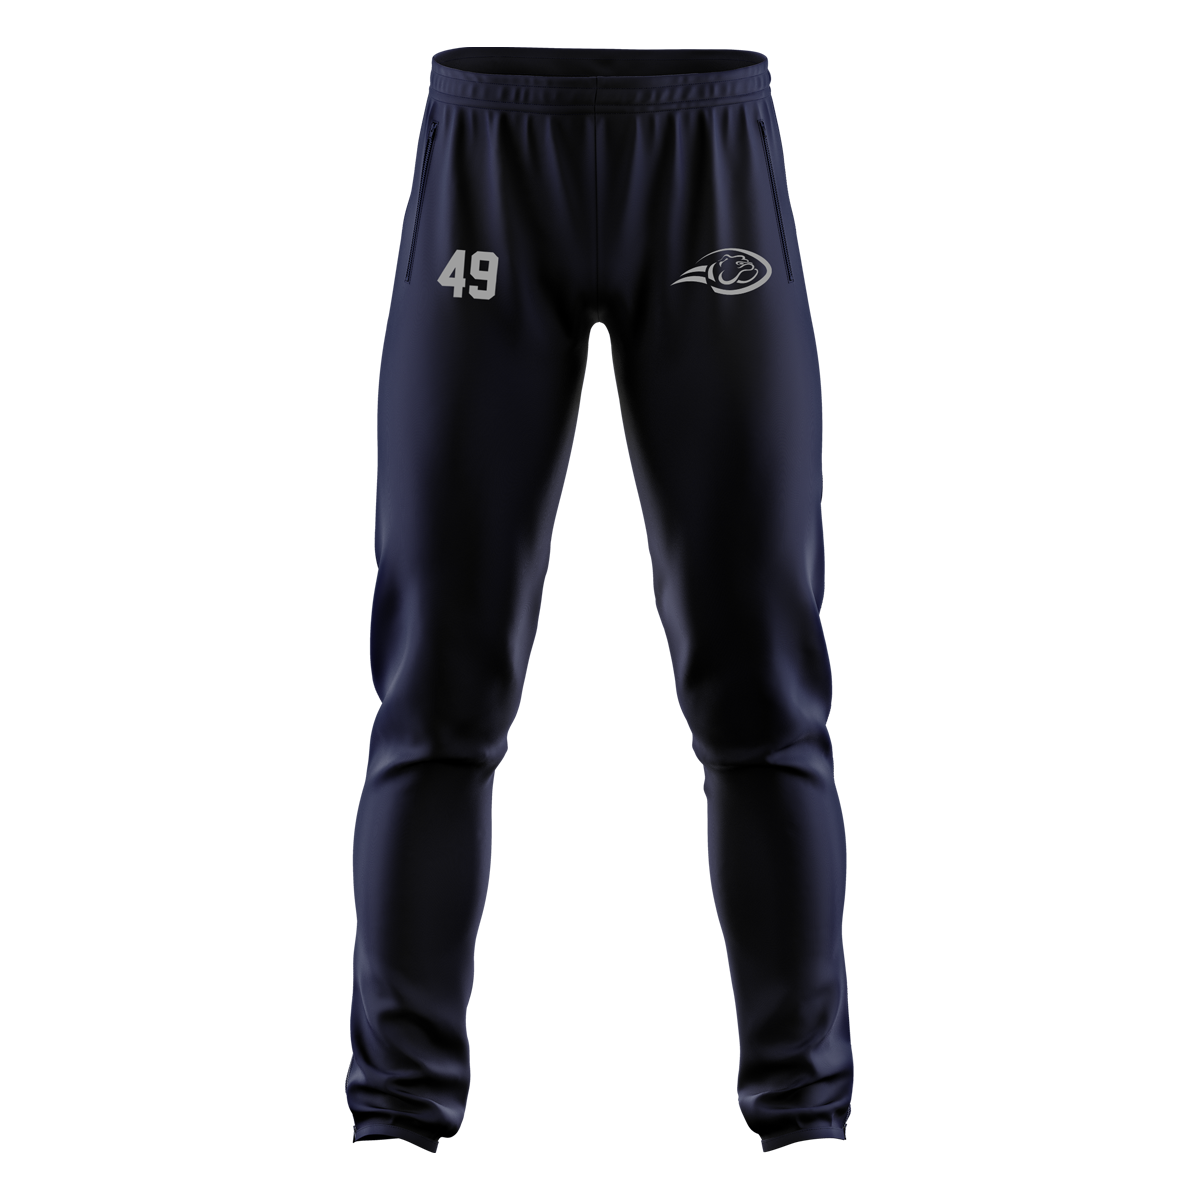 Wilddogs Leisure Pant with Playernumber/Initials